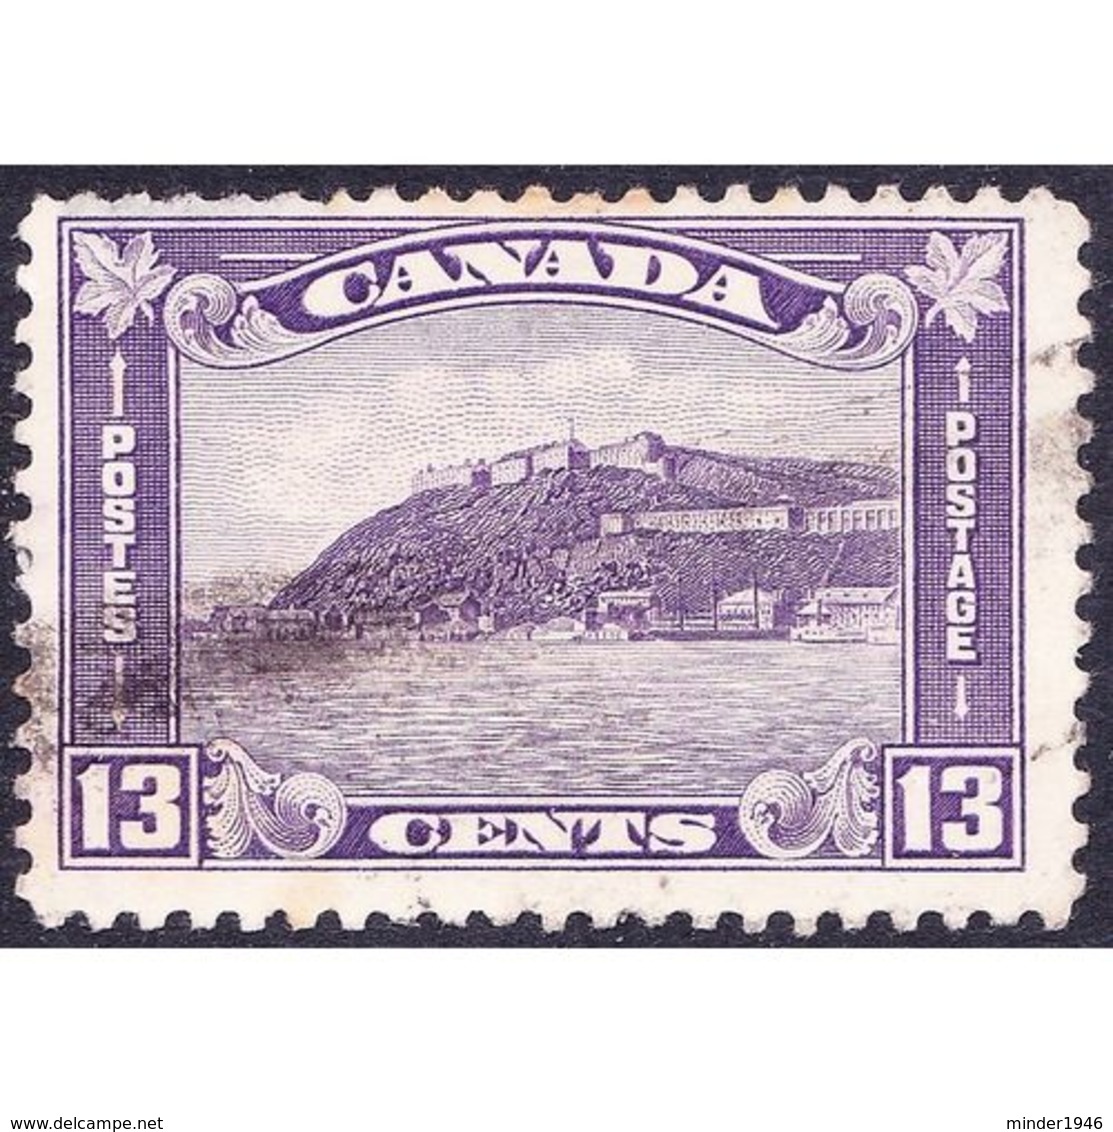 CANADA 1932 13 Cent Bright Violet The Old Citadel Quebec SG325 Fine Used - Used Stamps